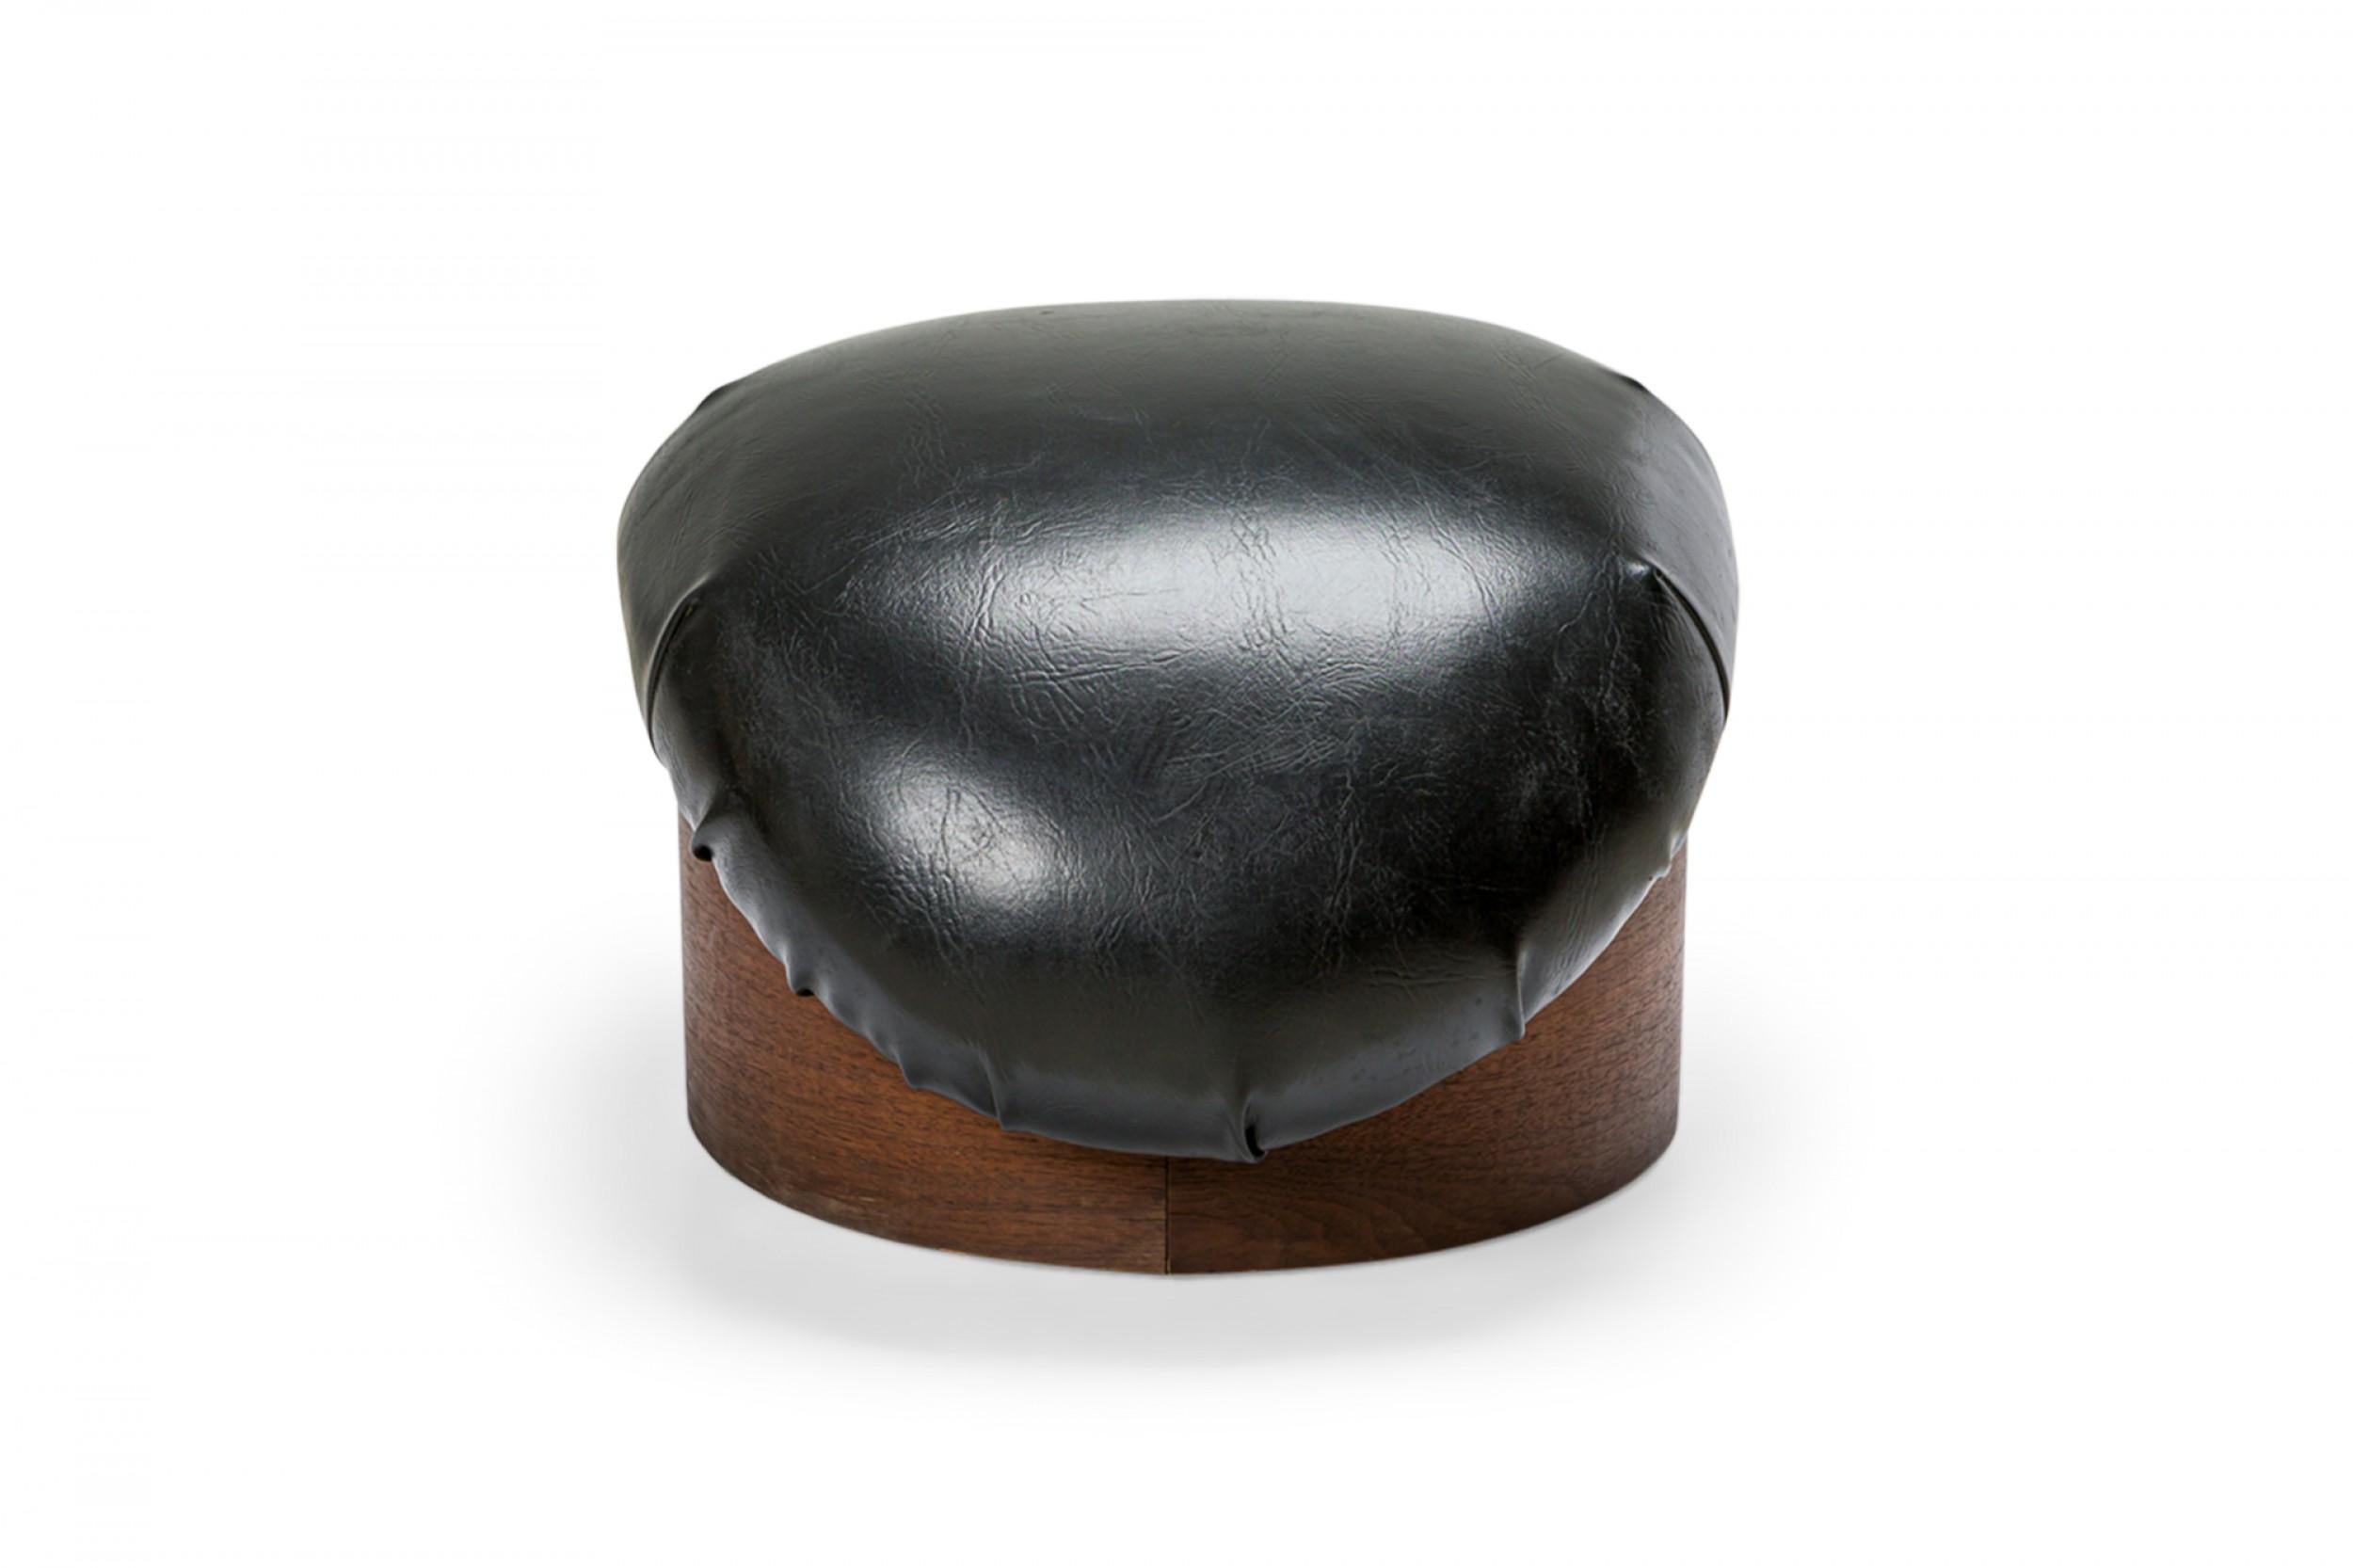 PAIR of American Mid-Century ottomans with curved black leather cushions supported by a circular wooden base. (MILO BAUGHMAN FOR THAYER COGGIN)(PRICED AS PAIR)